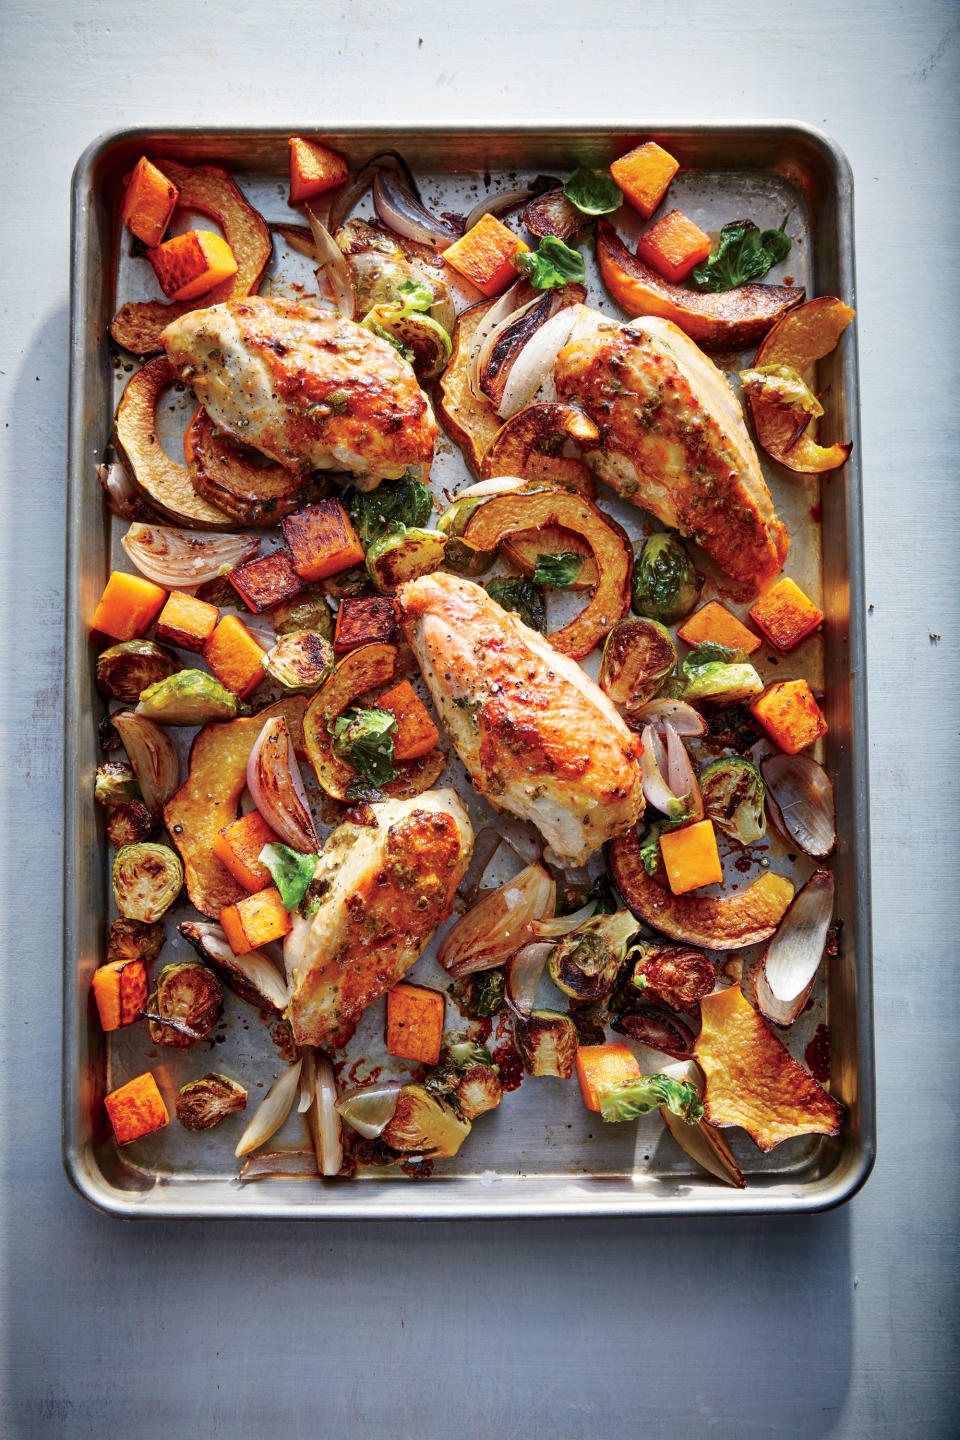 Maple-Mustard Roasted Chicken with Squash and Brussels Sprouts